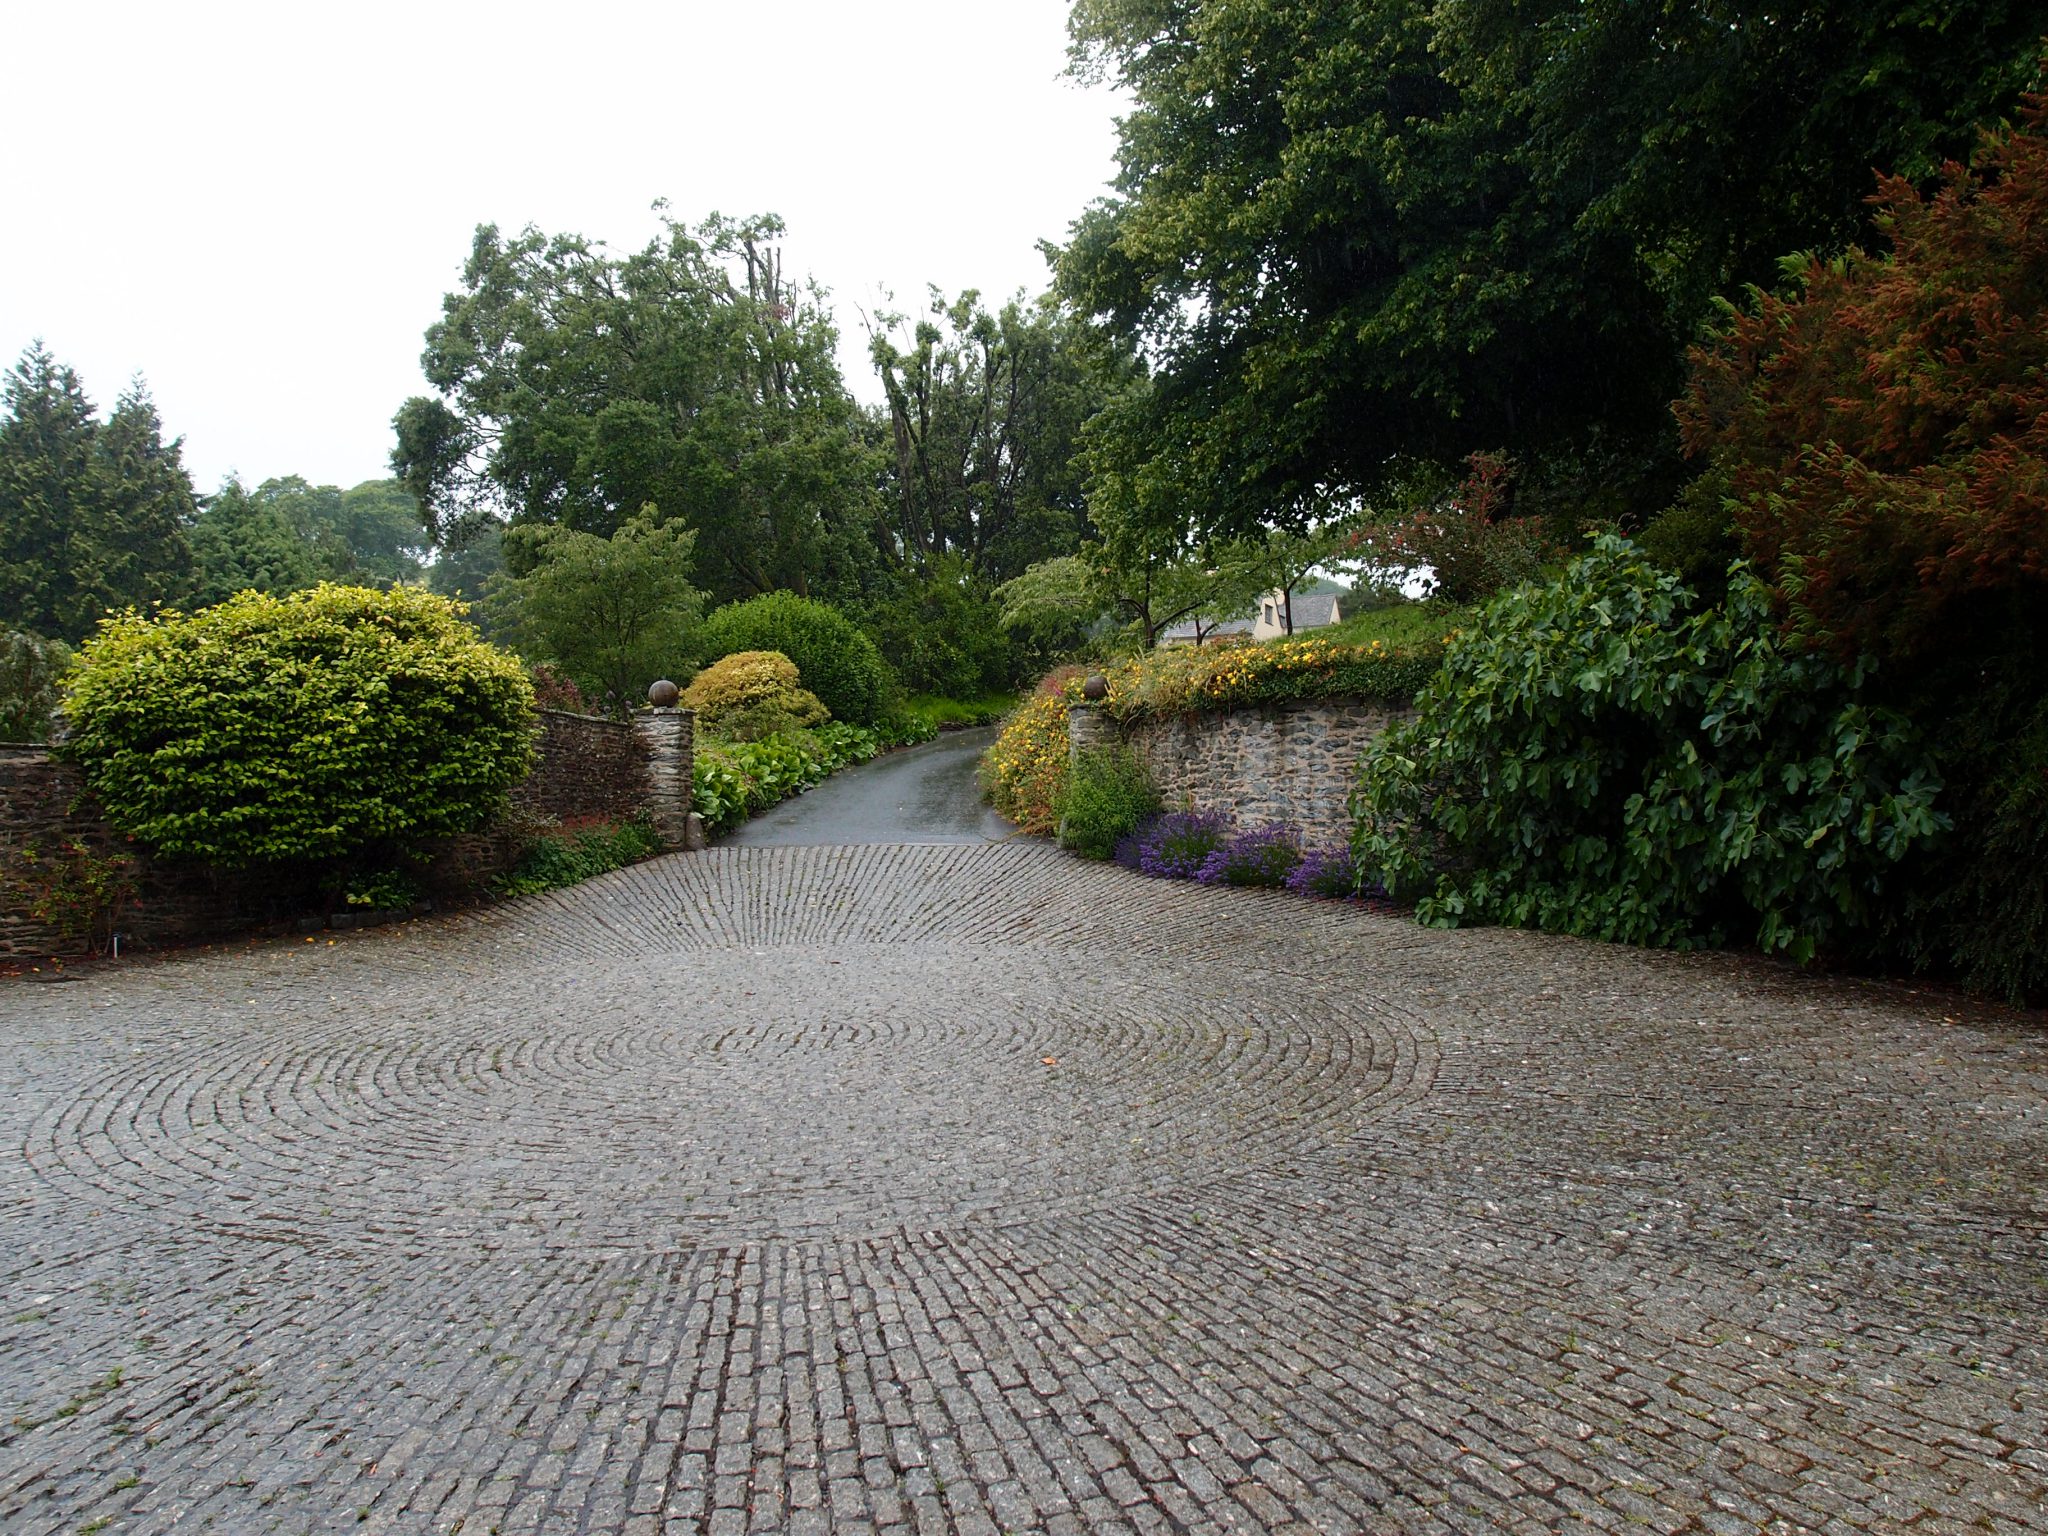  Our drizzly but encouraging view of the Forecourt, from the front porch. 